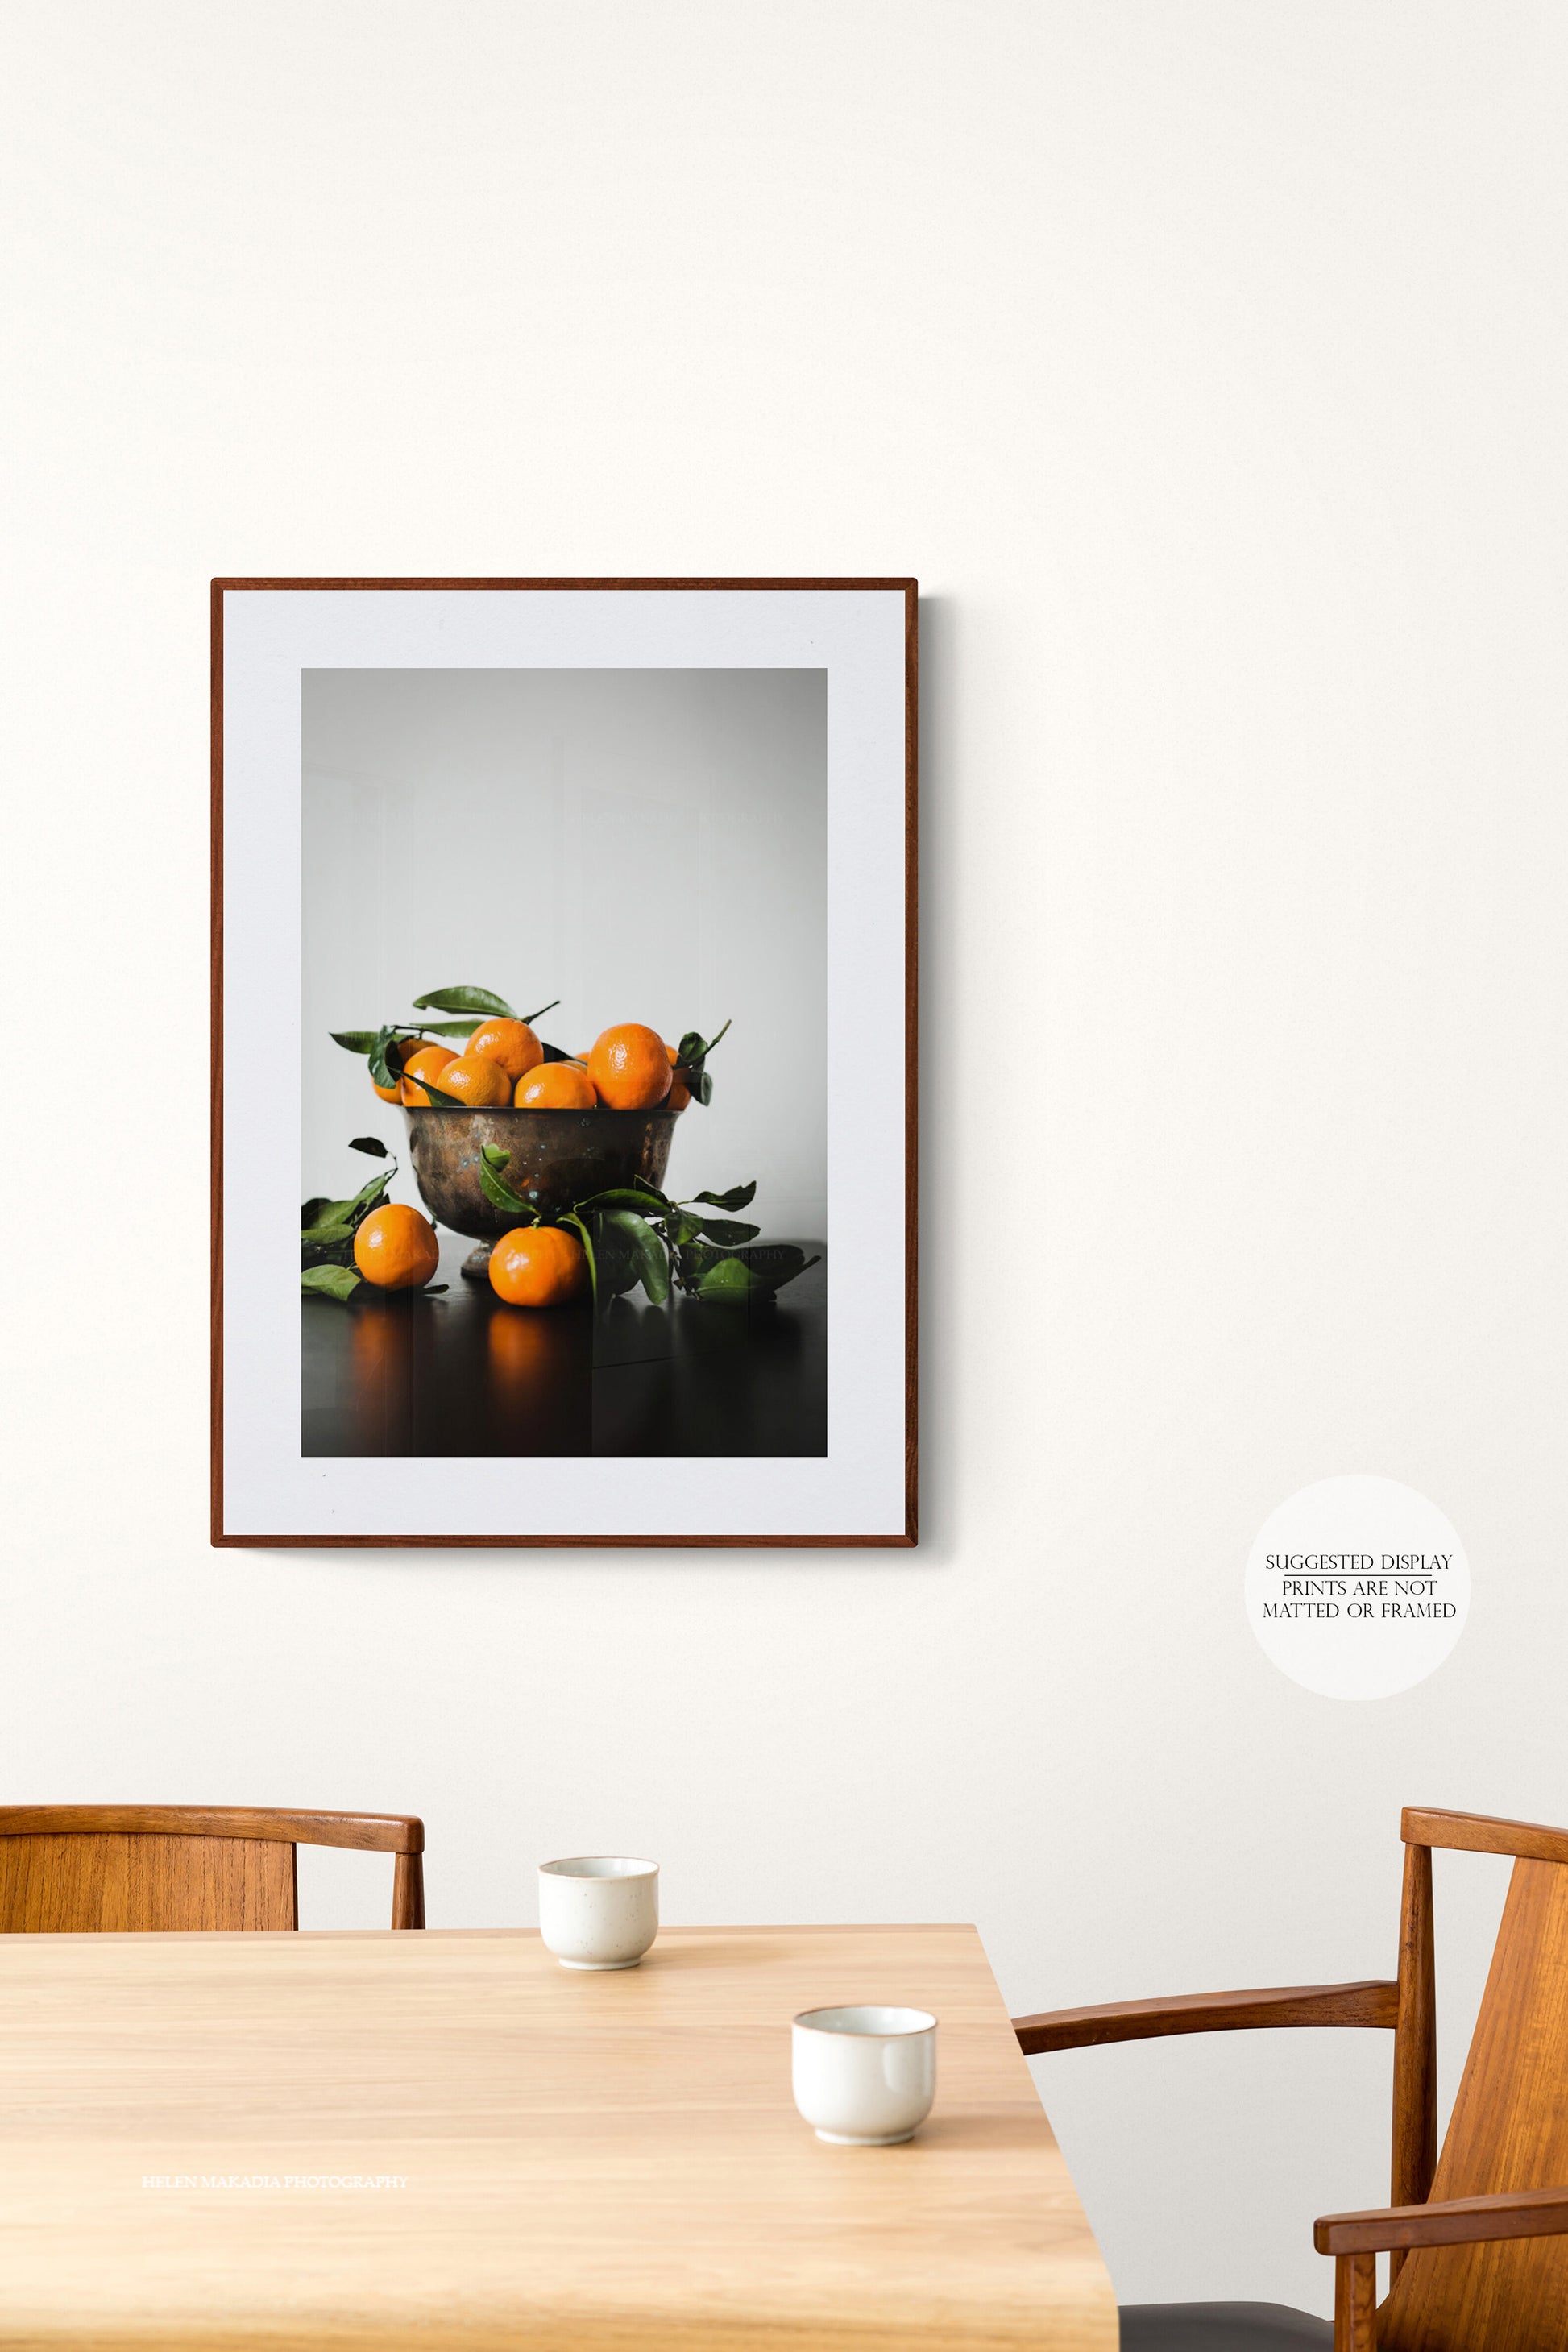 Photograph of a bowl of mandarin citrus in a dining room